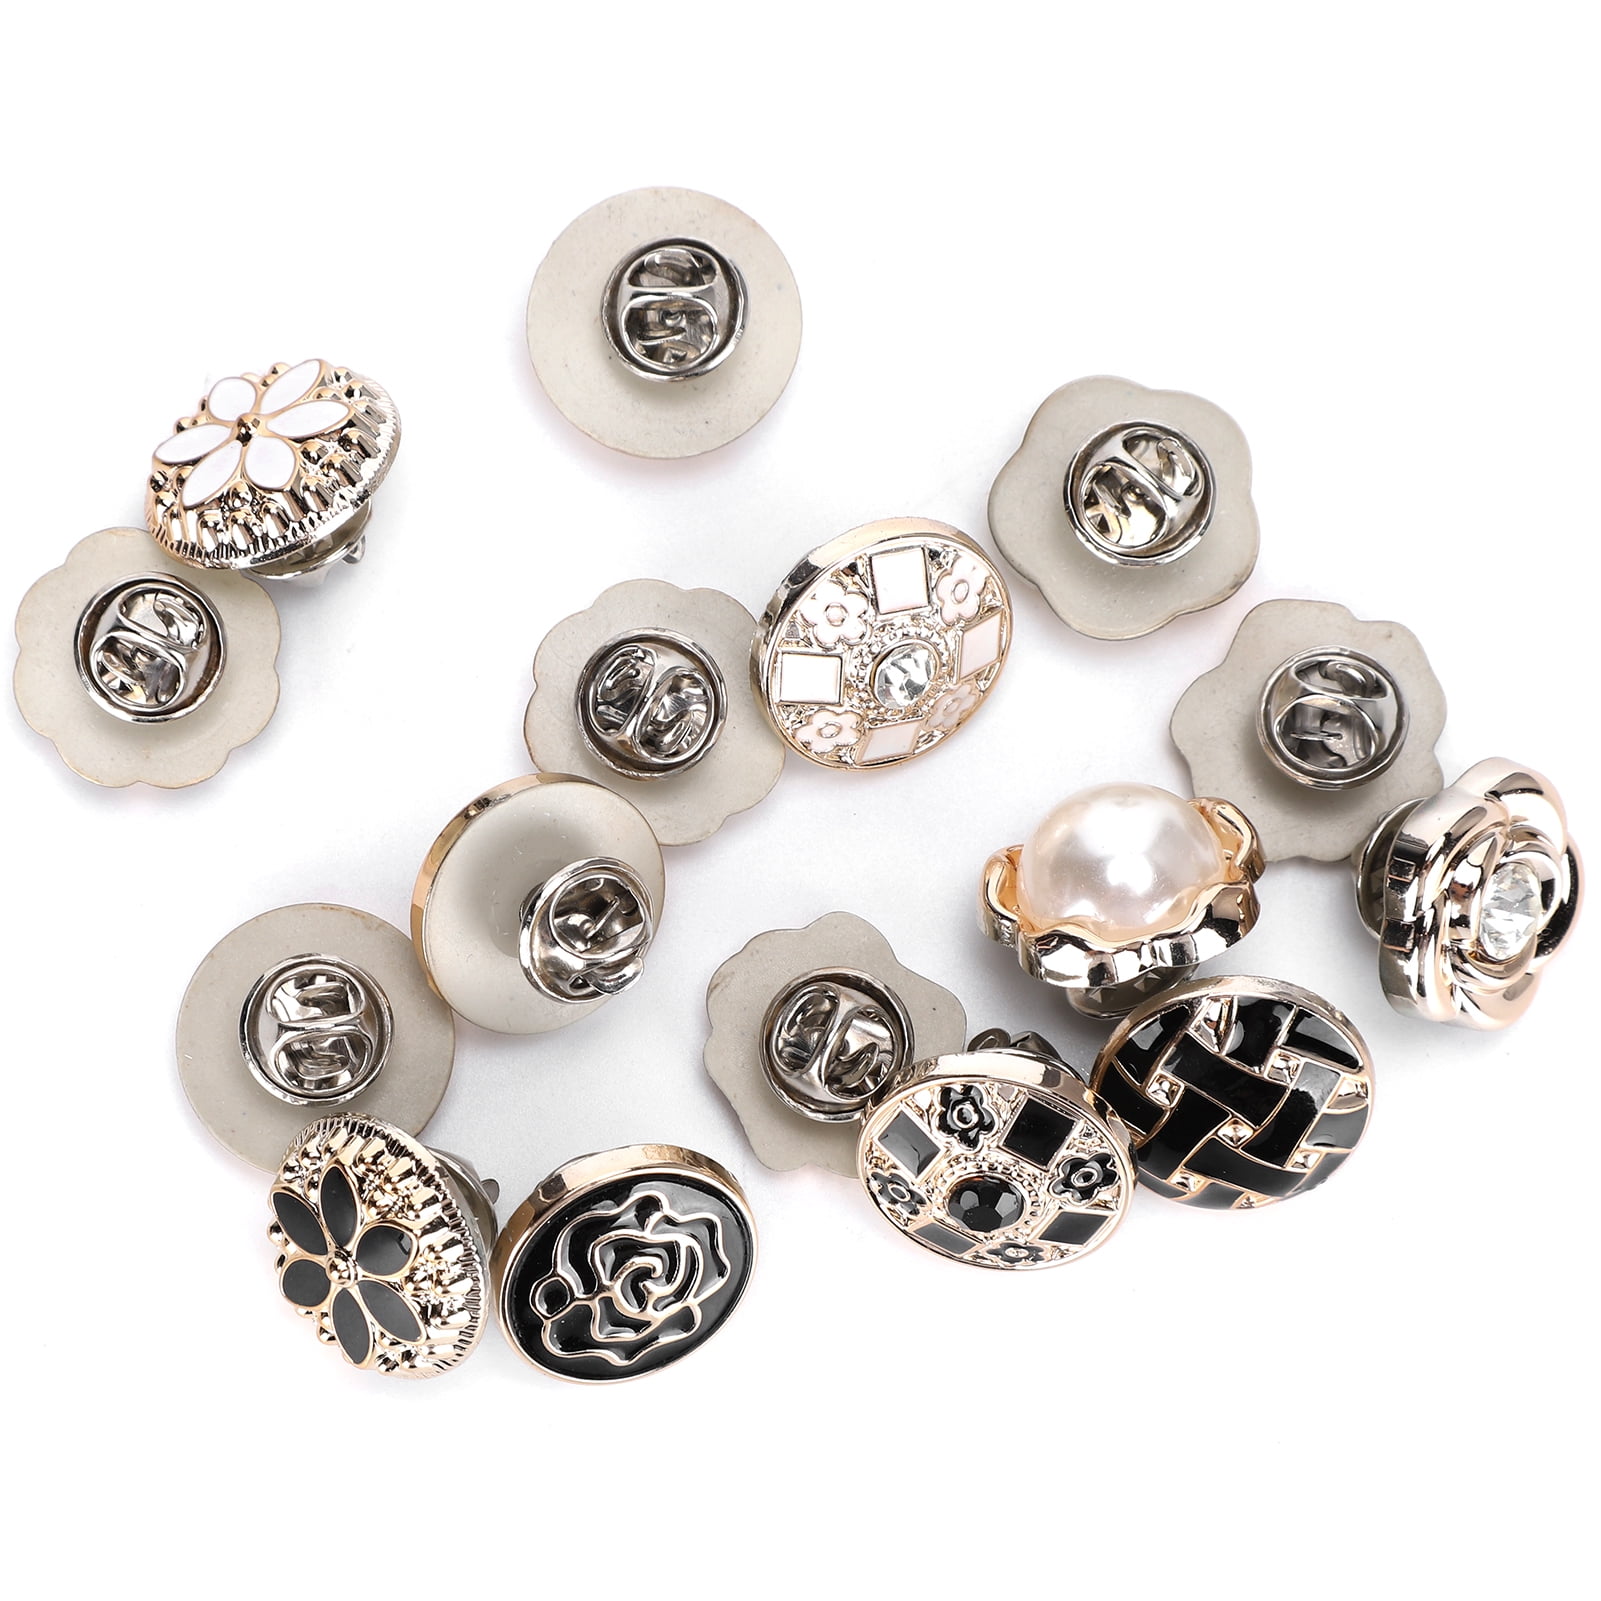  30 Pieces Cover up Button Pins Brooch Pins for Women Safety  Cover up Shirt Button Pin Brooch Buttons or Clothing Dress Supplies :  Clothing, Shoes & Jewelry